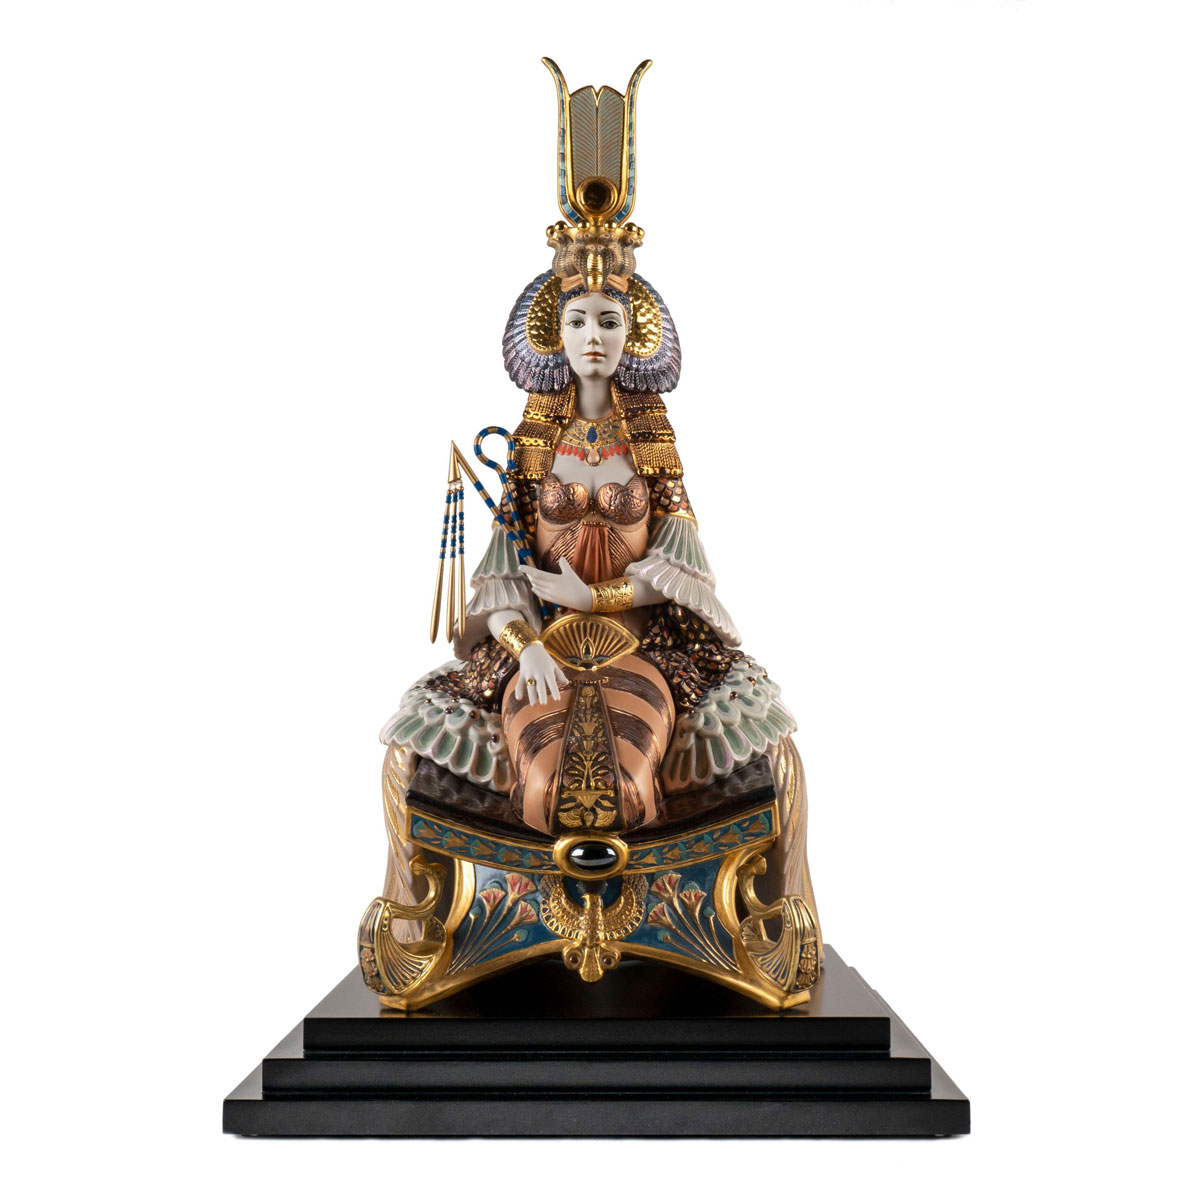 Lladro High Porcelain, Cleopatra Sculpture. Limited Edition